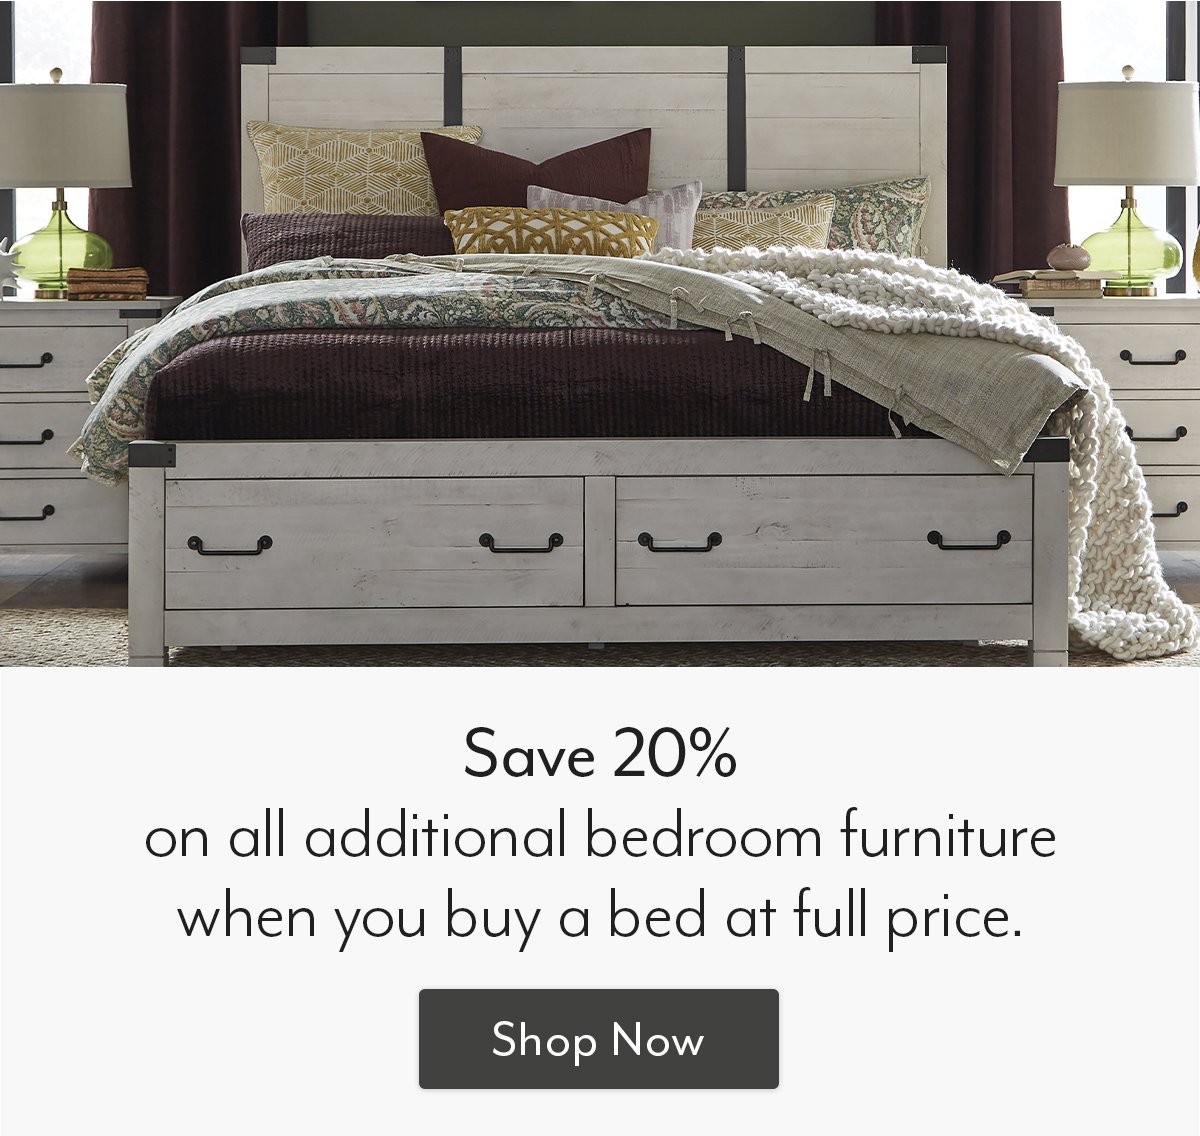 Save 20% on additional bedroom furniture when you buy a bed at full price!